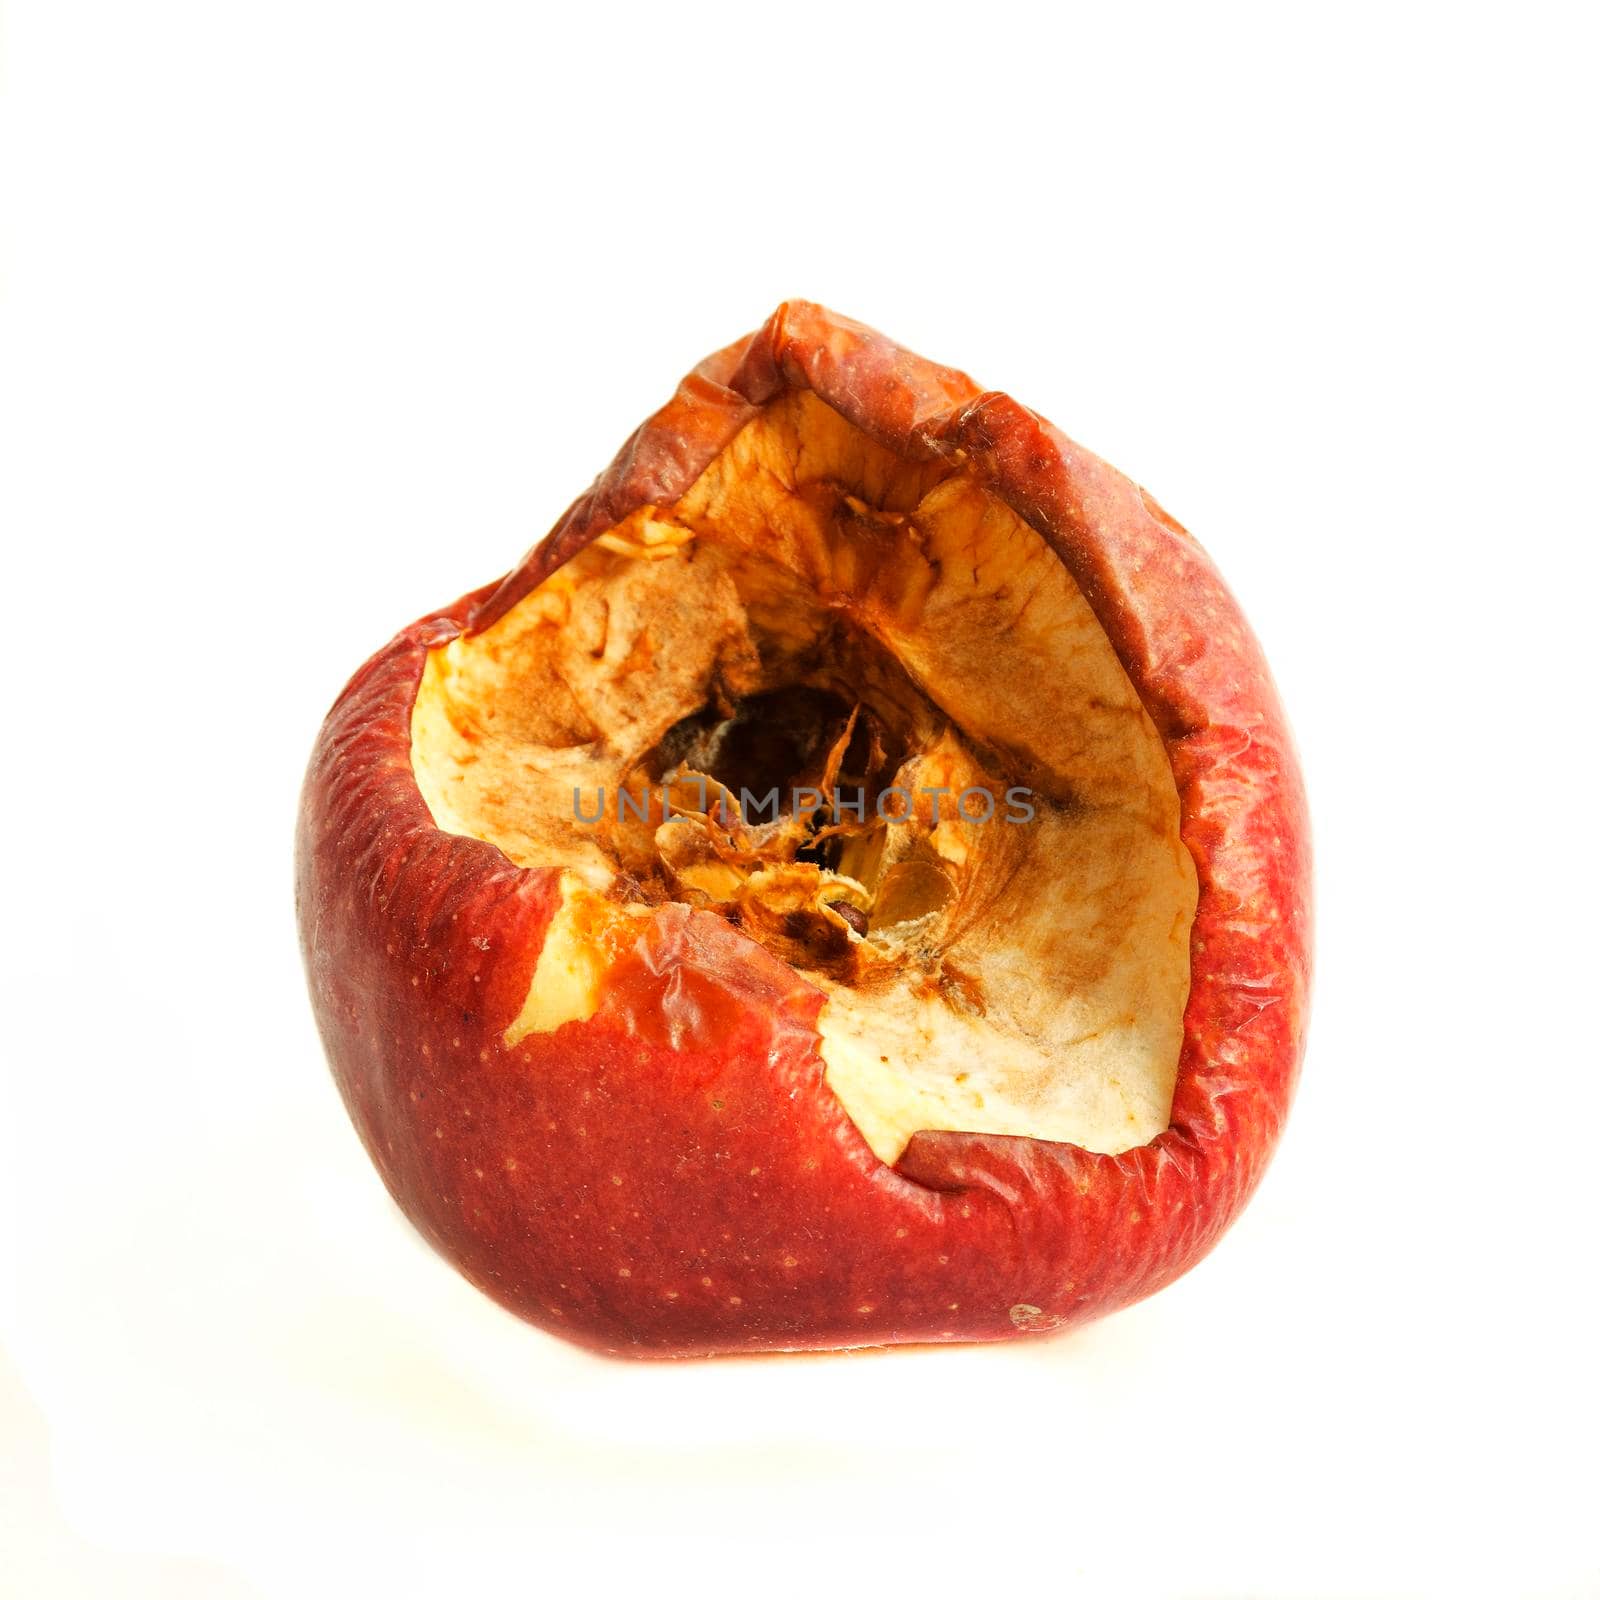  Big red bitten off and rotten apple isolated on white background. by andre_dechapelle